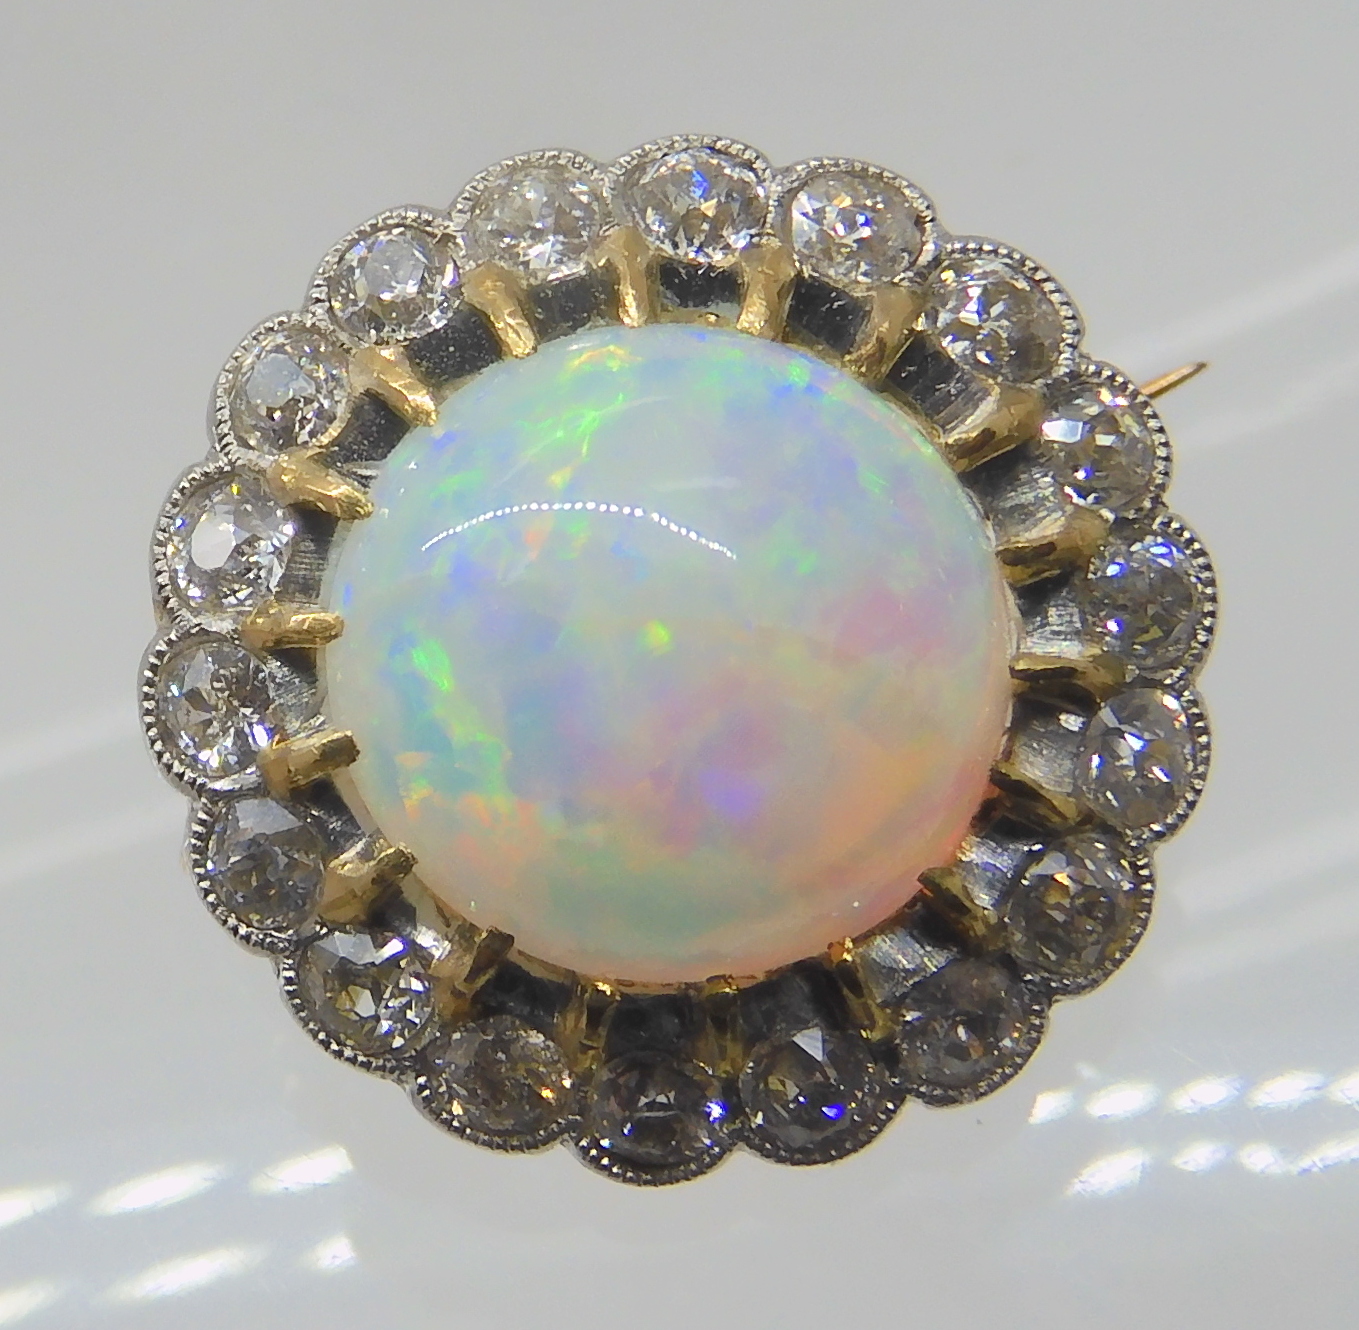 AN OPAL AND DIAMOND BROOCH opal approx 10.4mm in diameter, surrounded with a row of diamonds which - Image 3 of 6